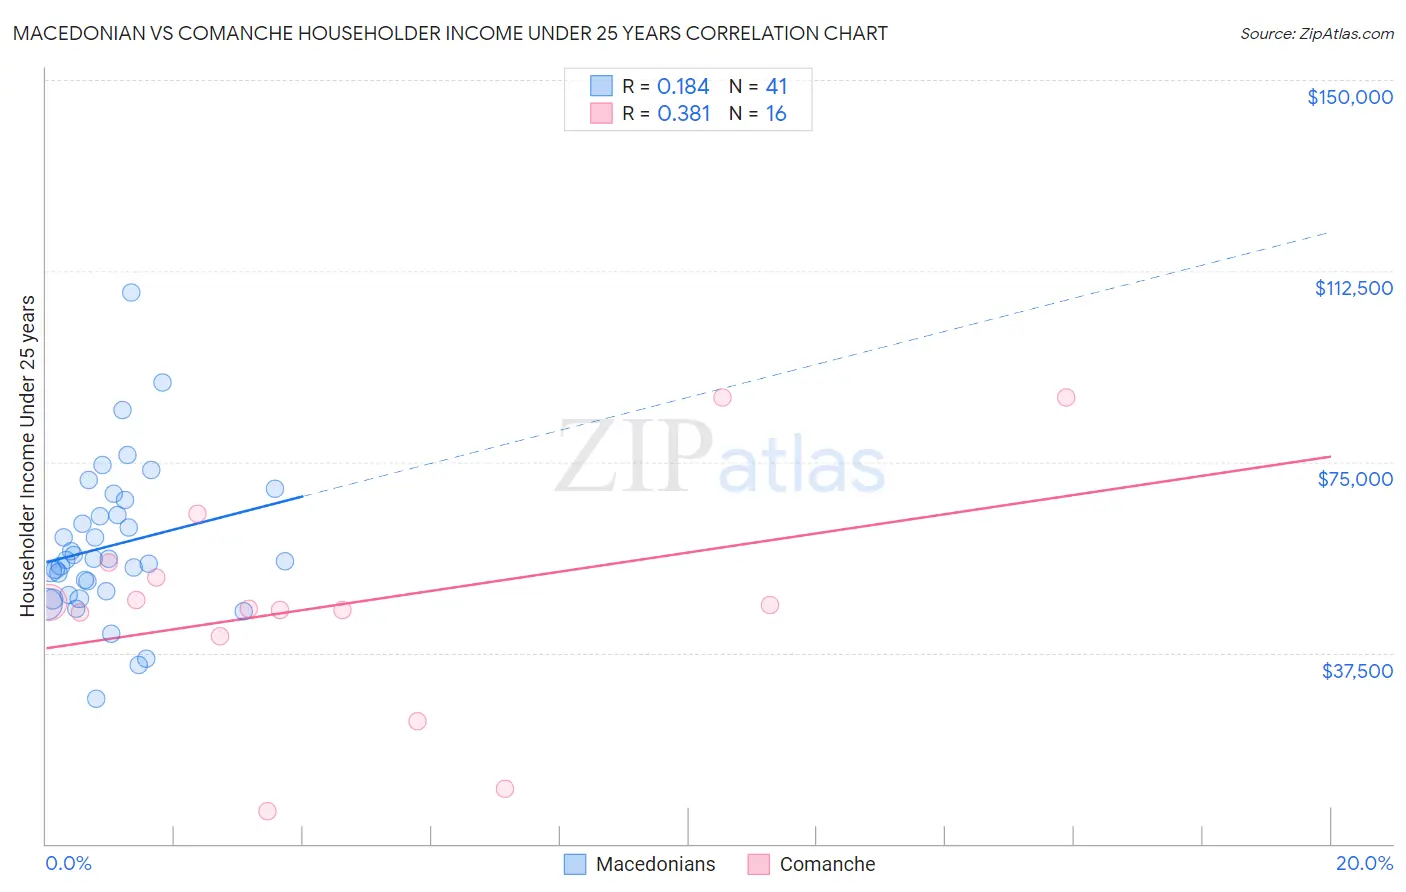 Macedonian vs Comanche Householder Income Under 25 years